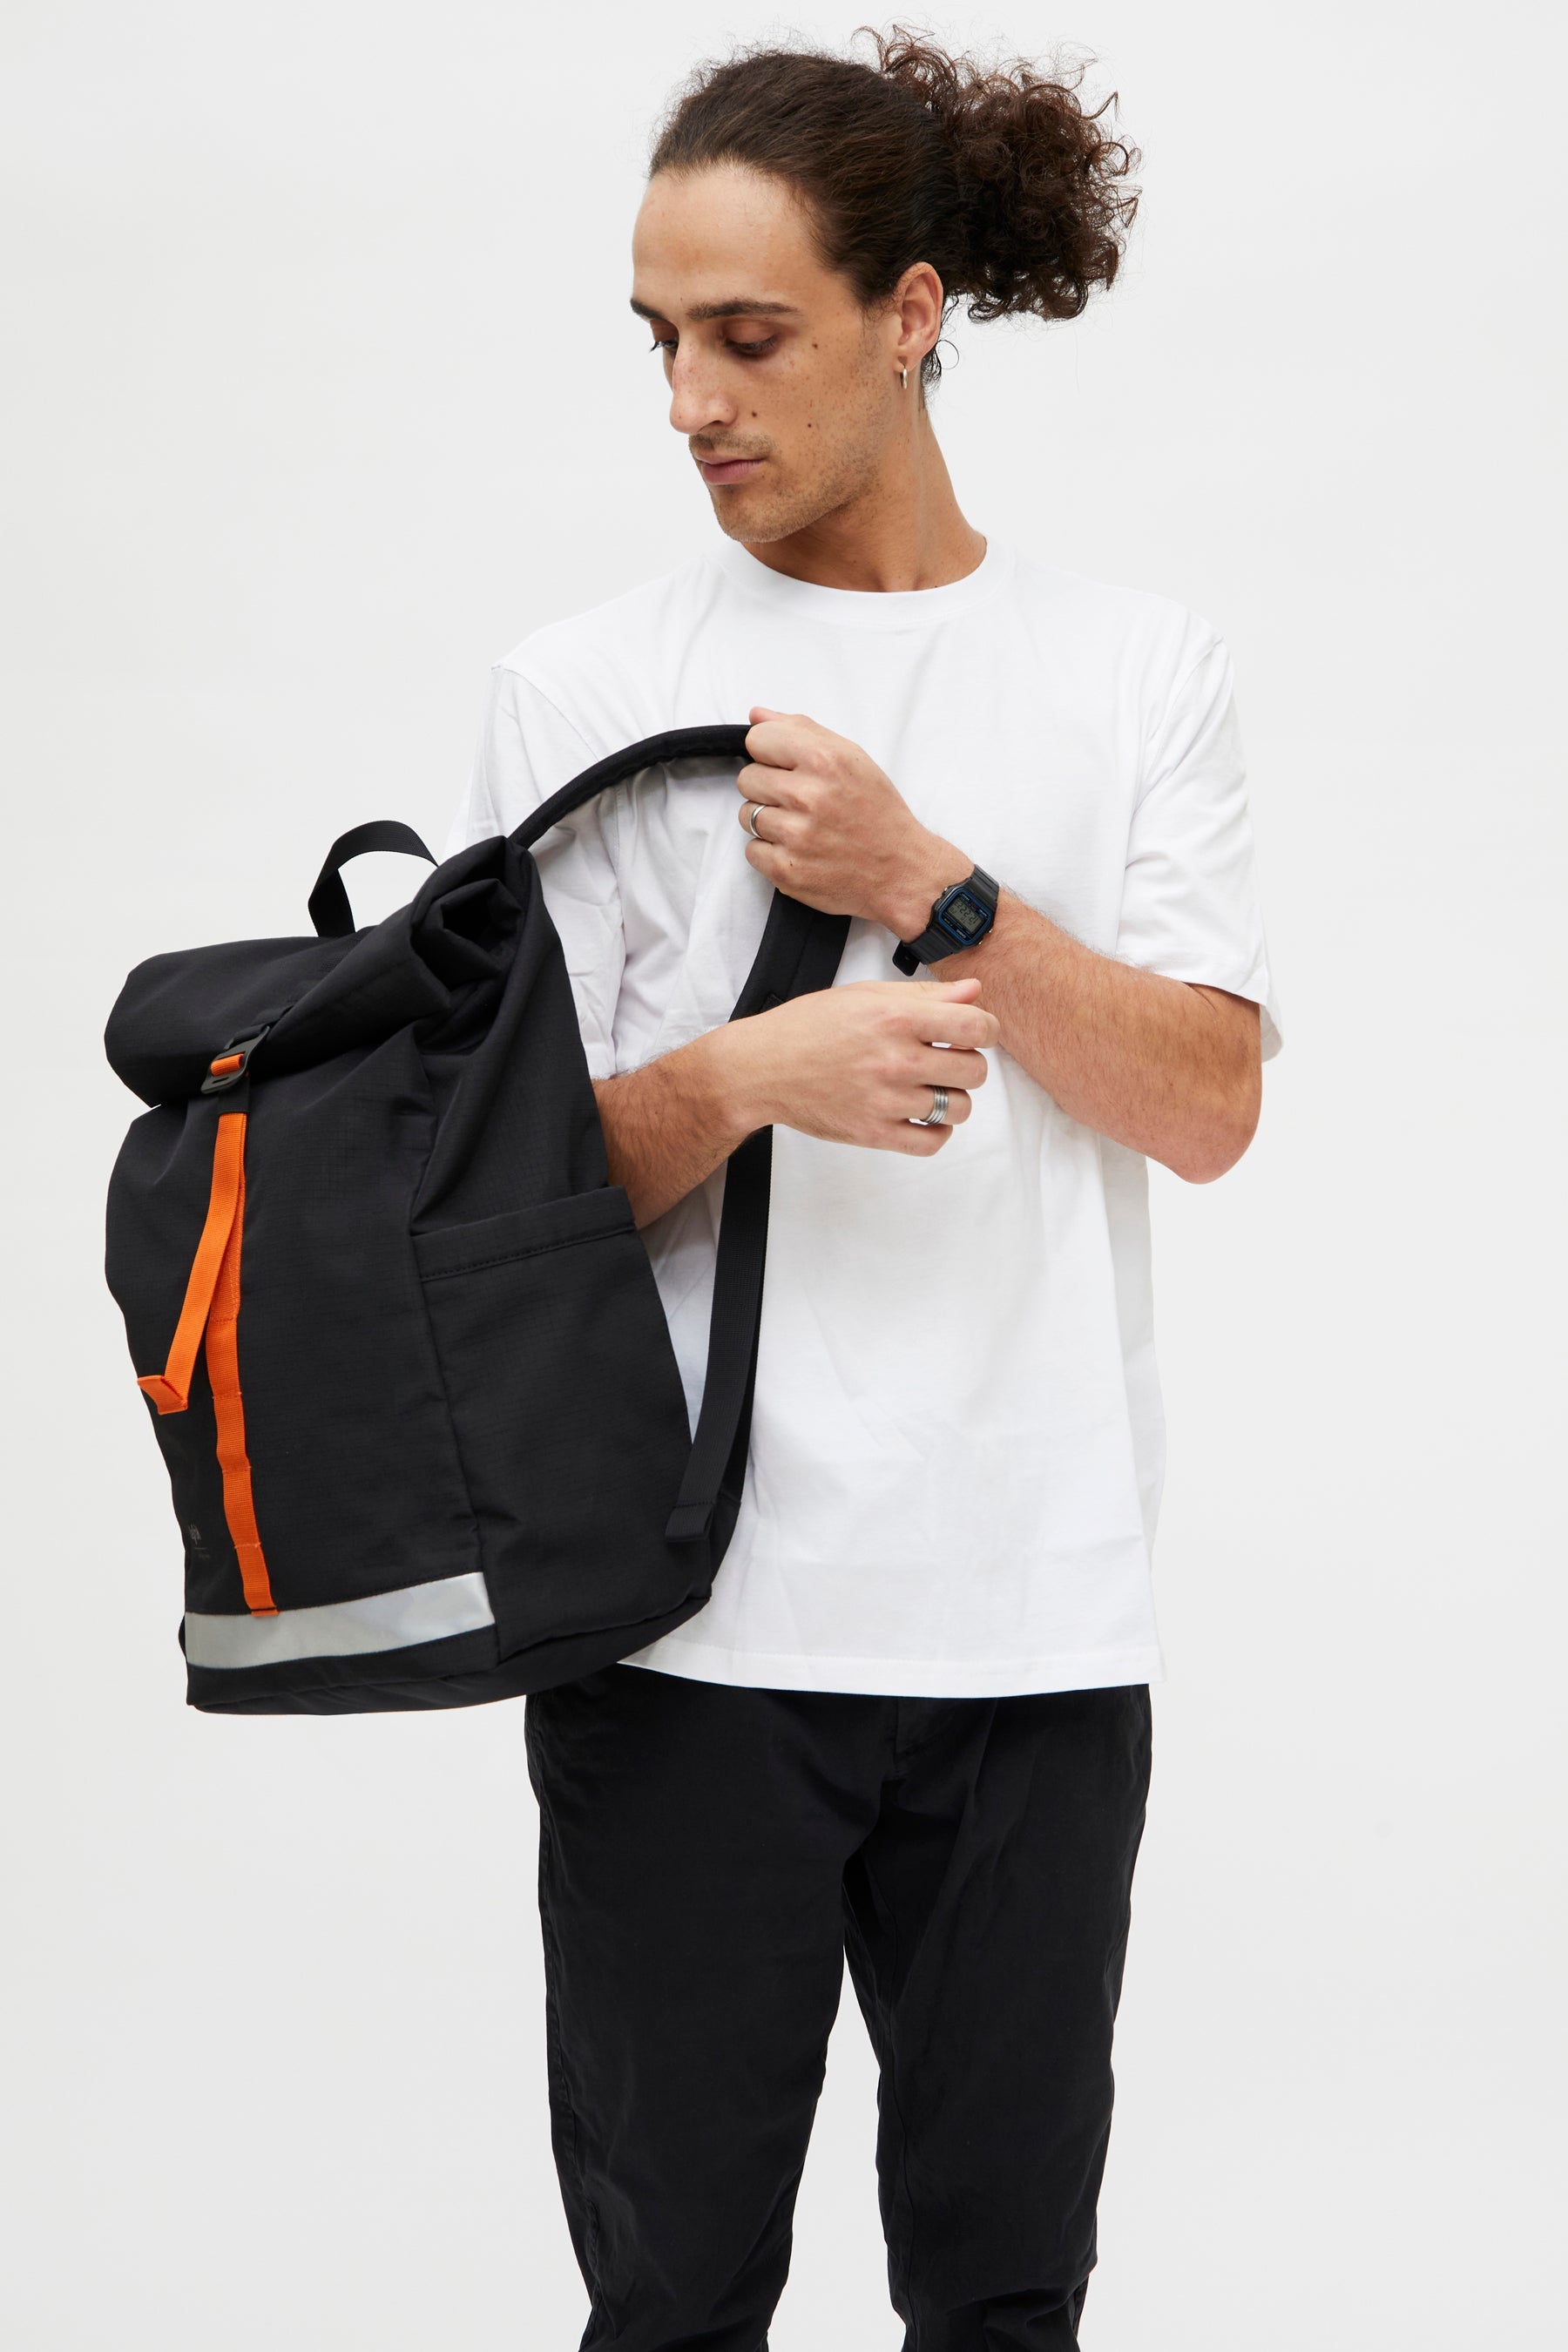 Black Lars Roll Vandra backpack made from recycled PET from Lefrik